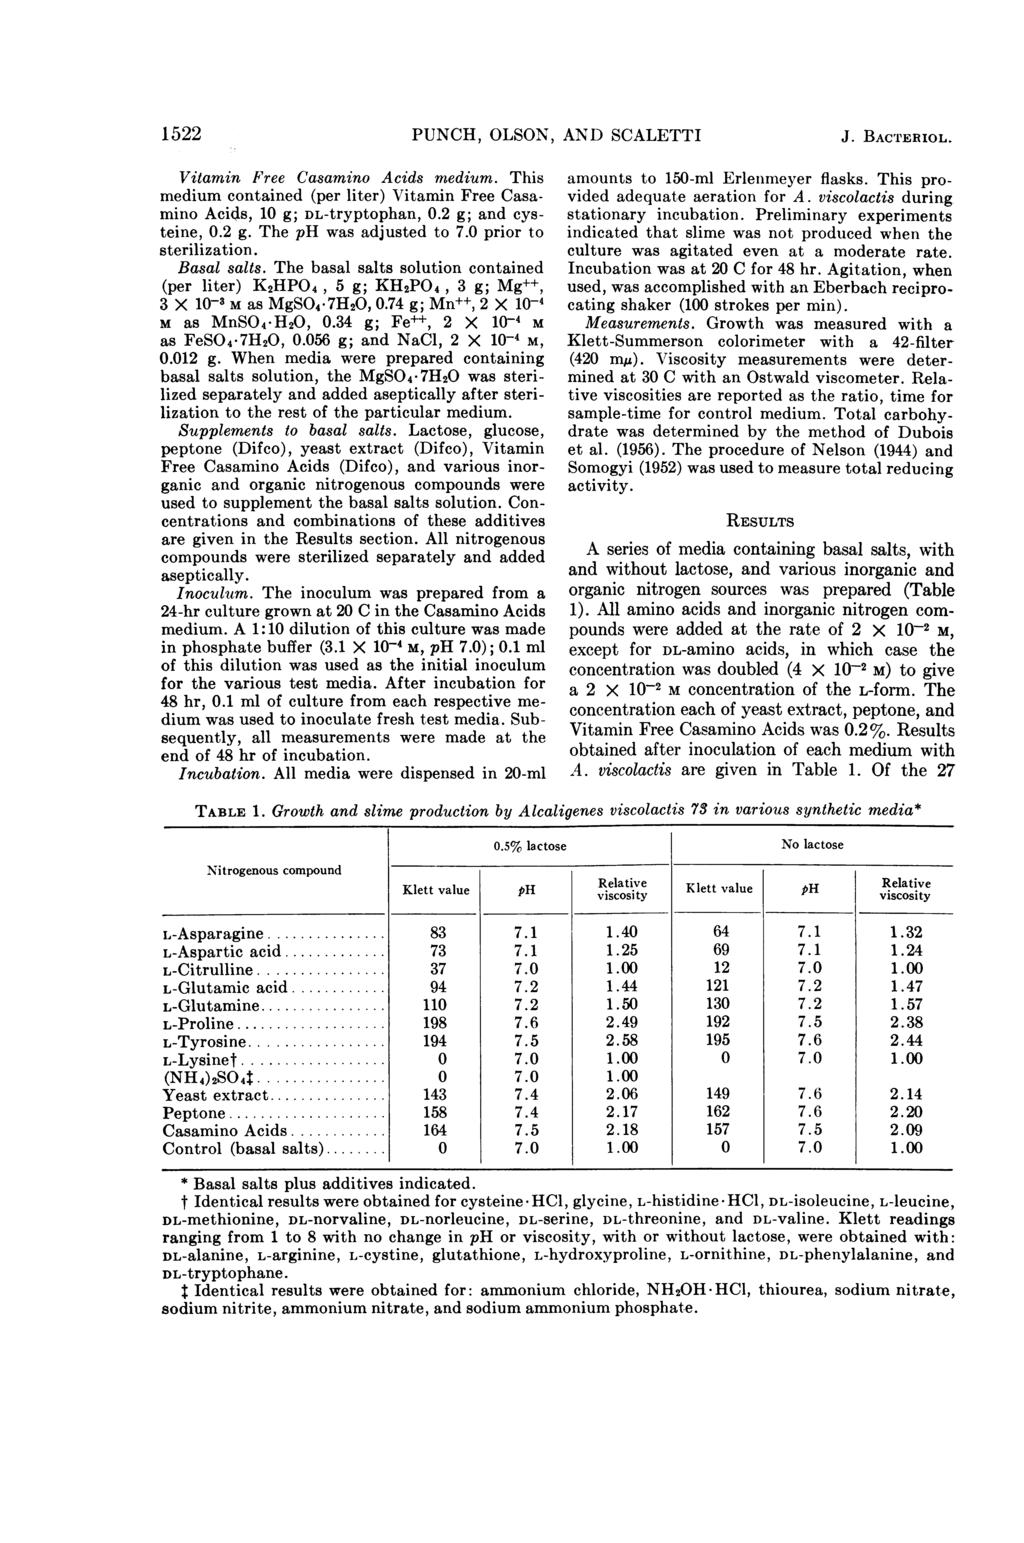 1522 PUNCH, OLSON, AND SCALETTI J. BACTERIOL. Vitamin Free Casamino Acids medium. This medium contained (per liter) Vitamin Free Casamino Acids, 10 g; DL-tryptophan, 0.2 g; and cysteine, 0.2 g. The ph was adjusted to 7.